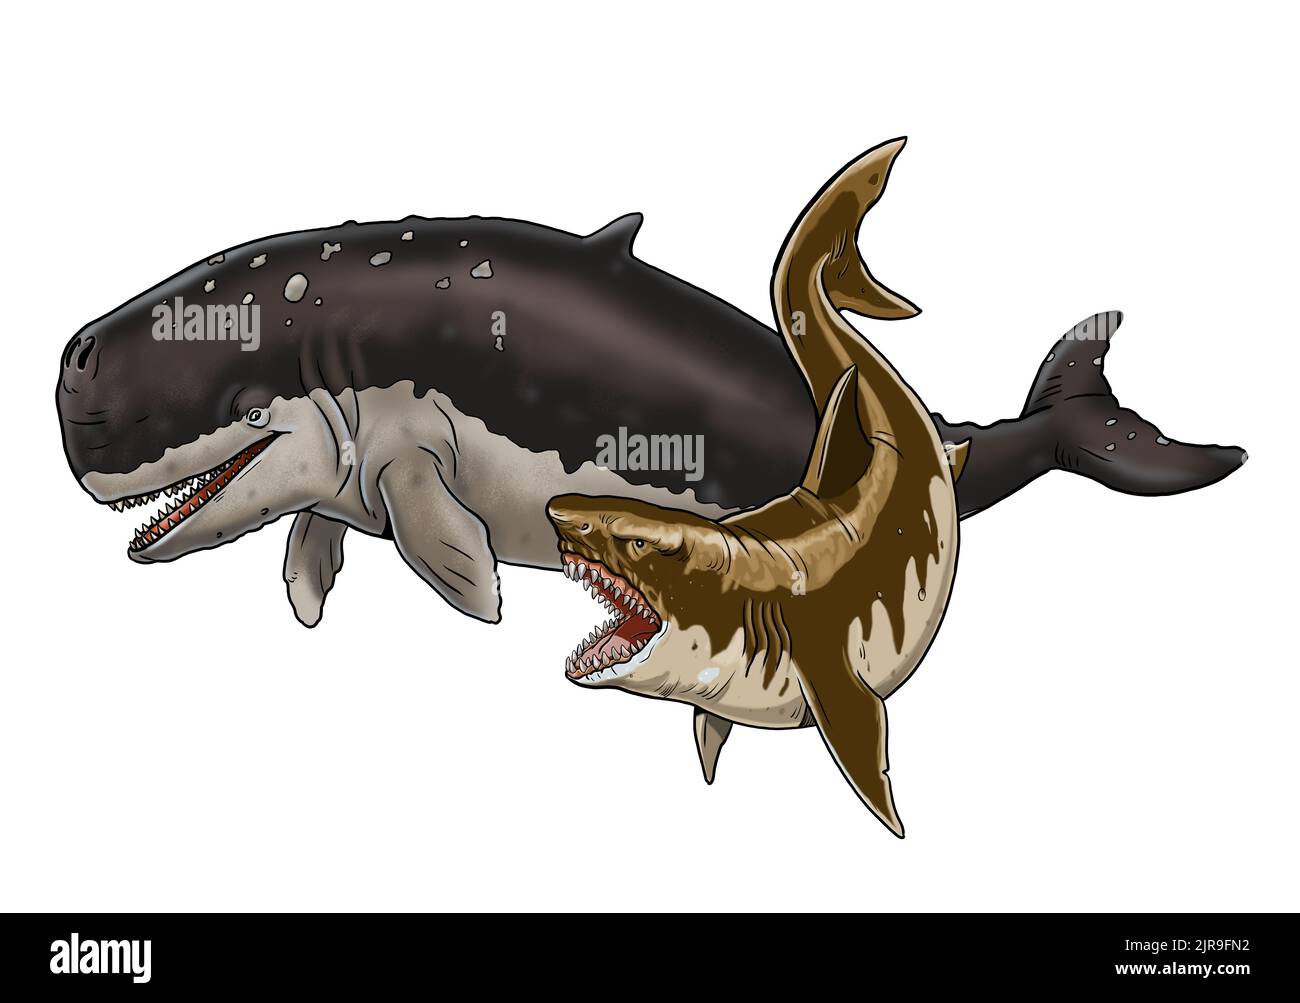 Shark megalodon attacks a prehistoric whale Livyatan. Battle of the animals illustration. Template for coloring book. Stock Photo